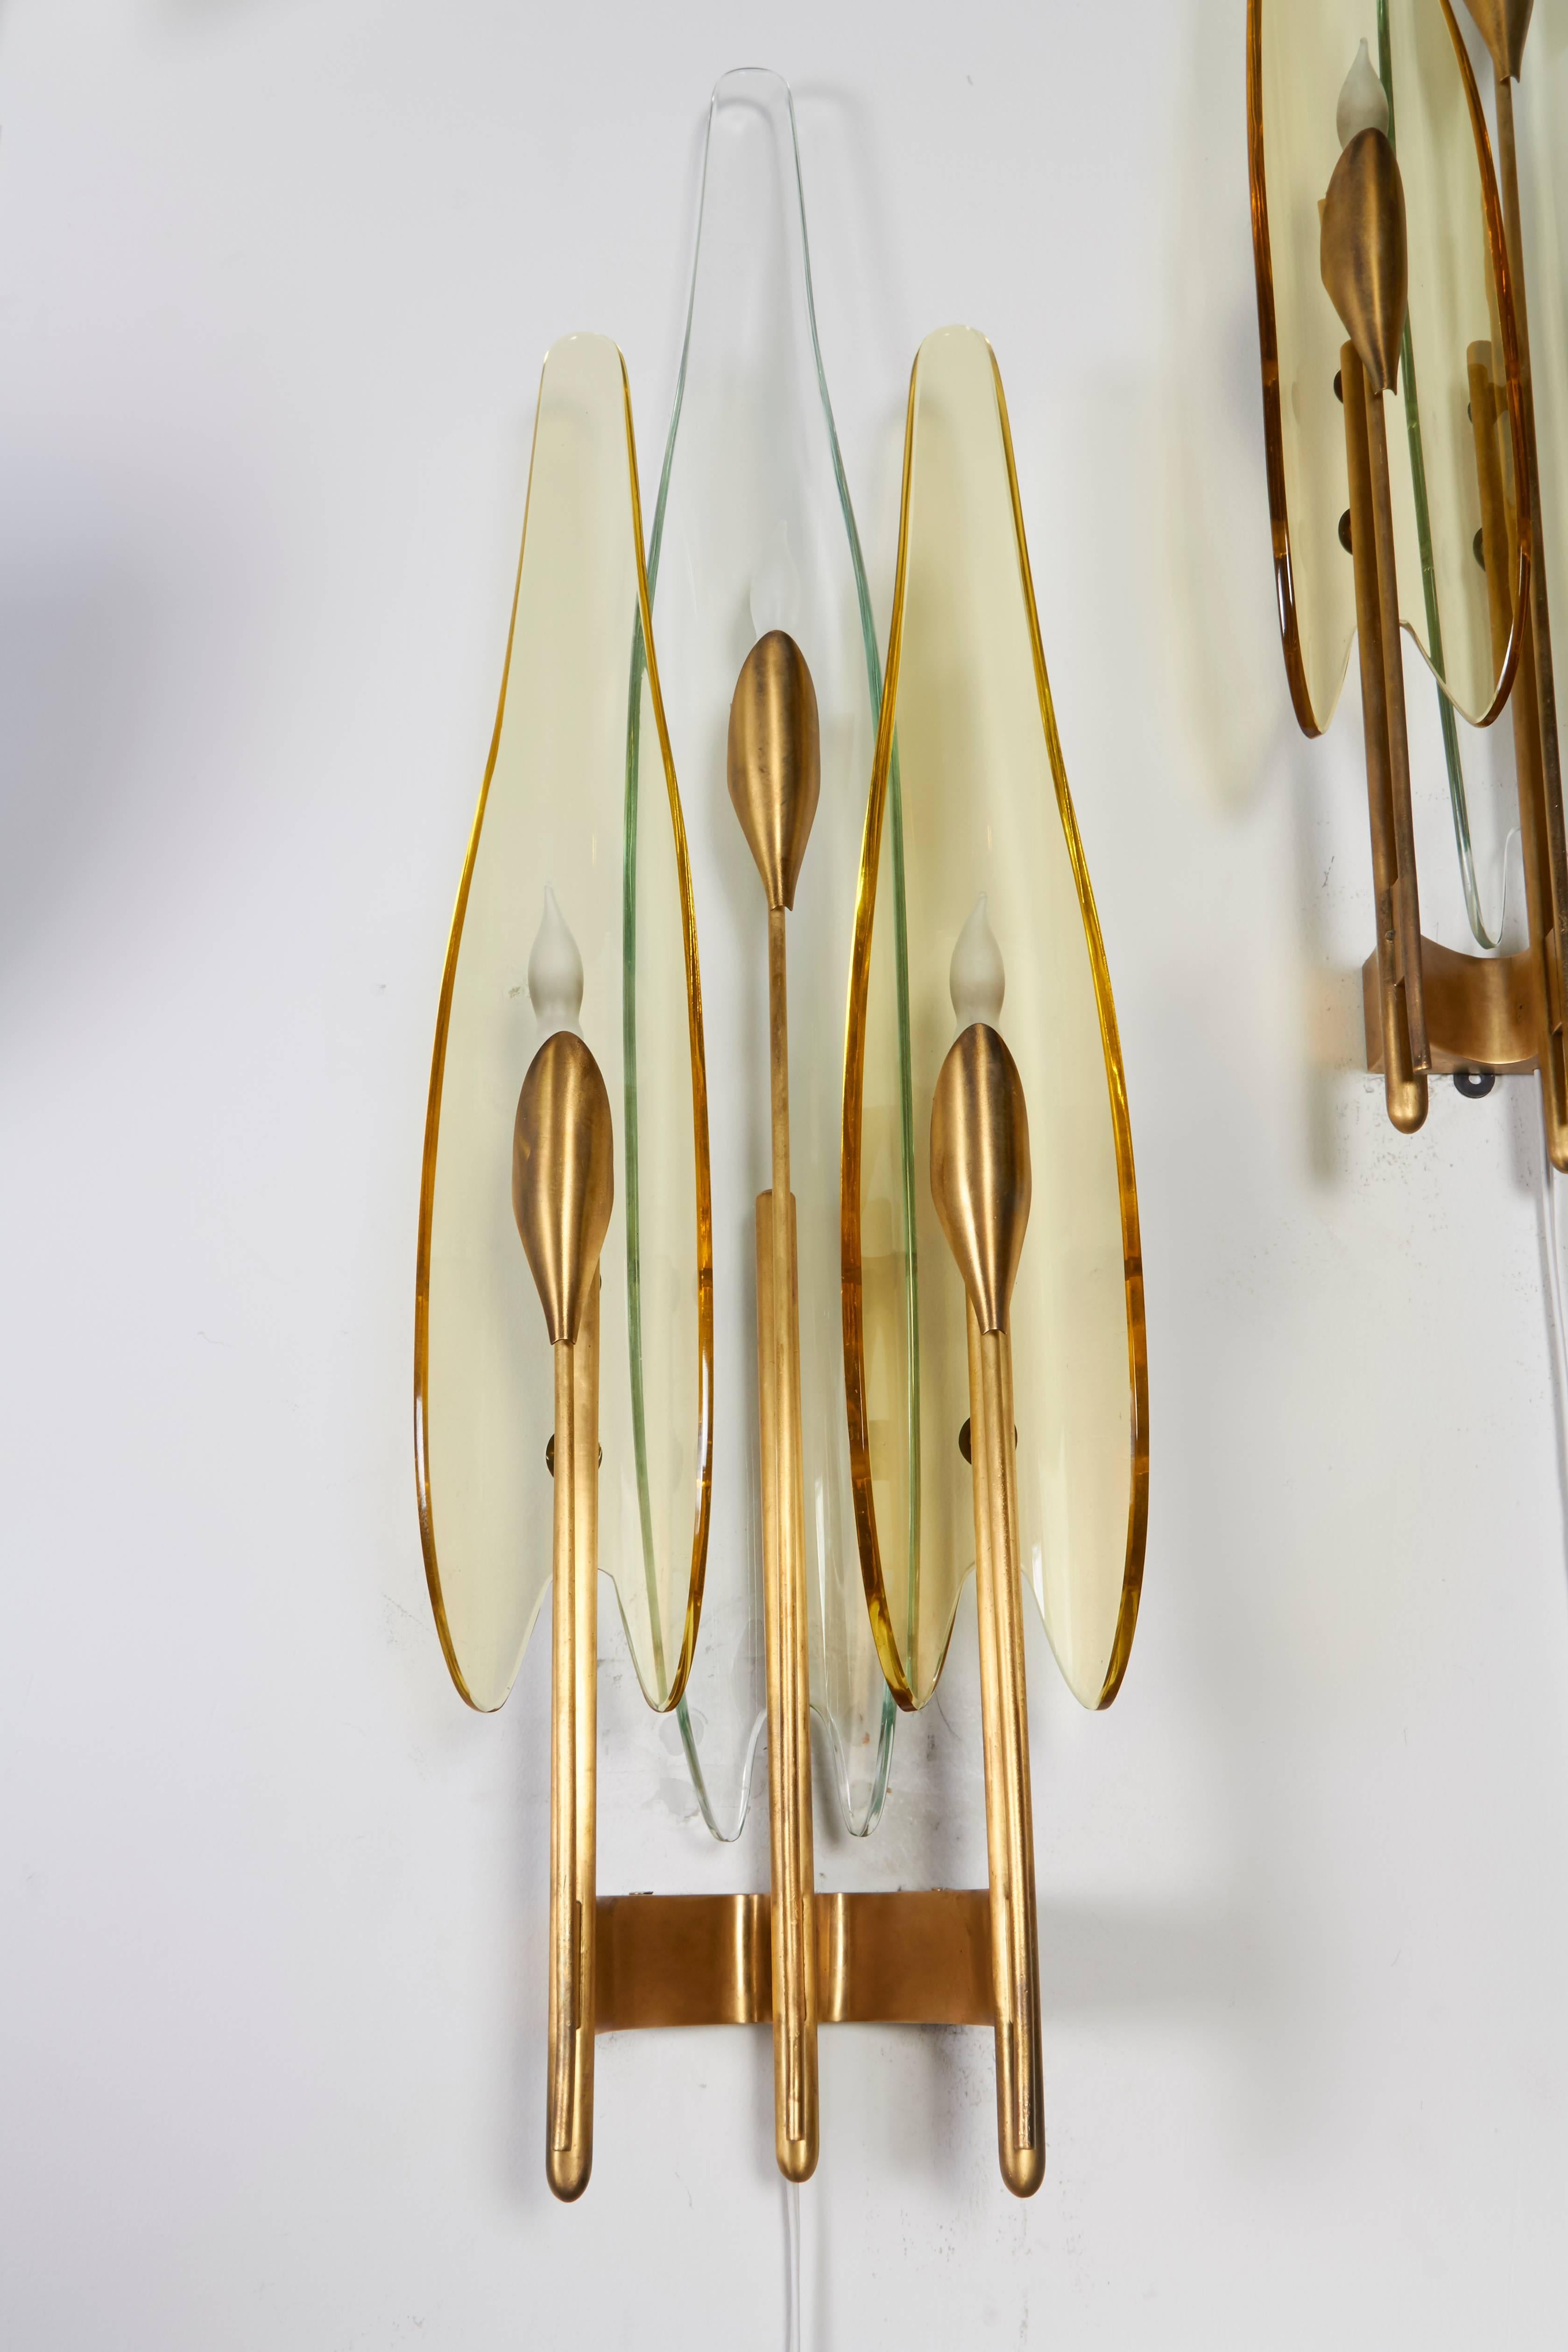 The Dahlia sconces designed by Max Ingrand are Mid-Century elegance at its best.